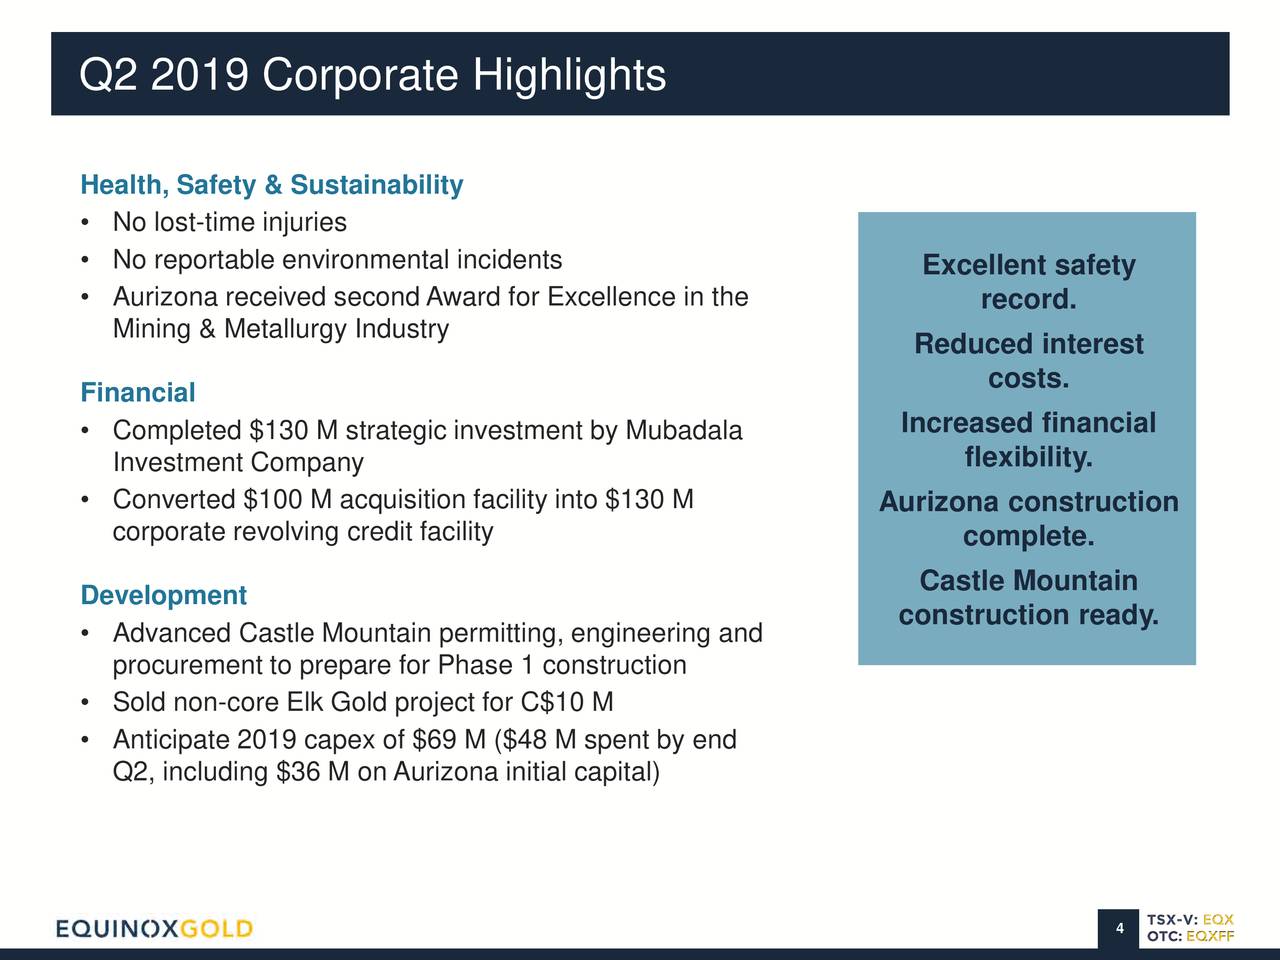 Q2 2019 Corporate Highlights